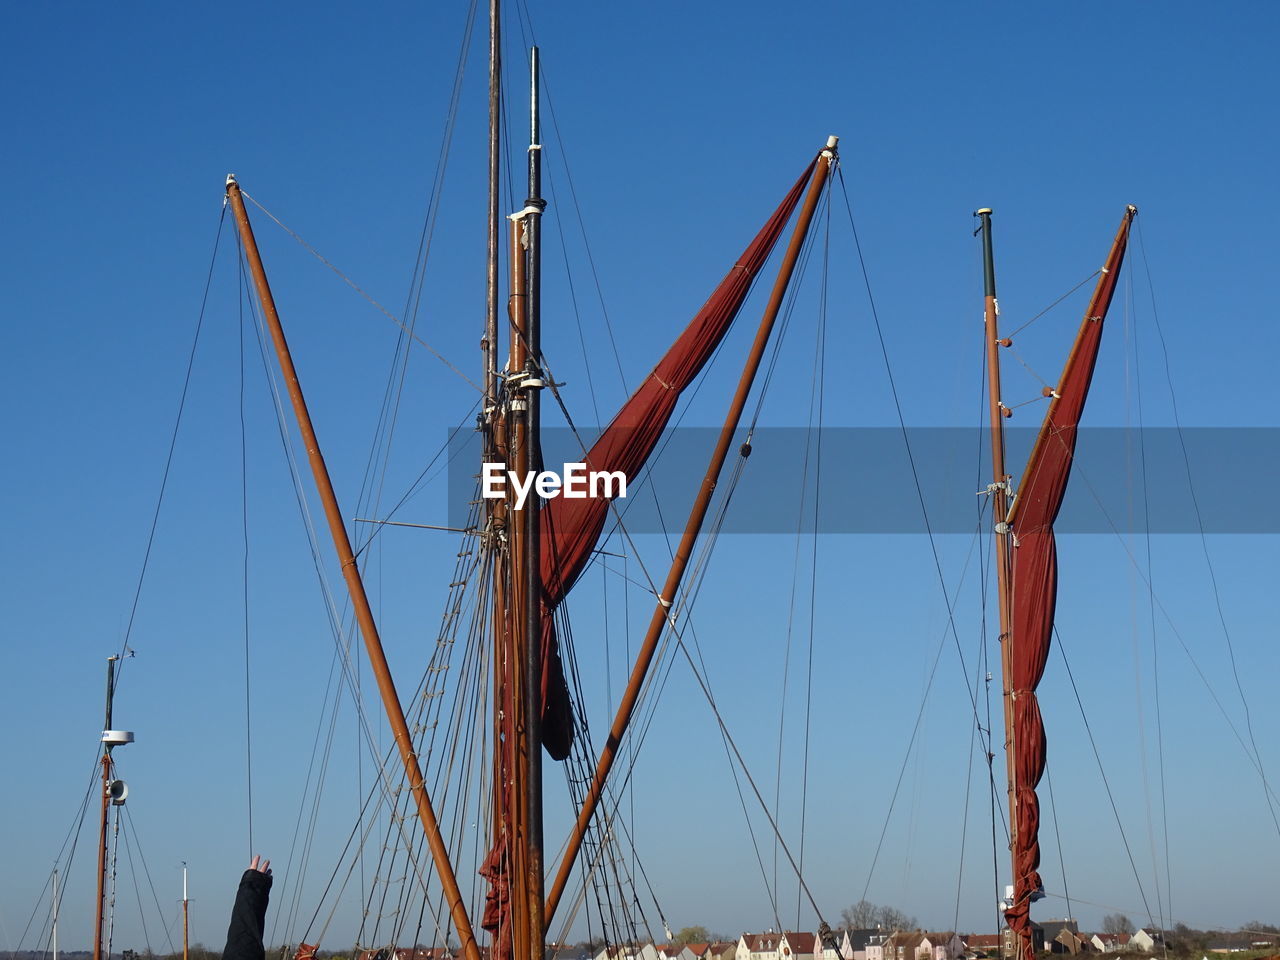 sailboat, nautical vessel, transportation, sky, water, sea, vehicle, sailing, mode of transportation, ship, sailing ship, blue, mast, nature, pole, clear sky, tall ship, no people, harbor, boat, architecture, watercraft, outdoors, travel, day, sunny, windjammer, schooner, rigging